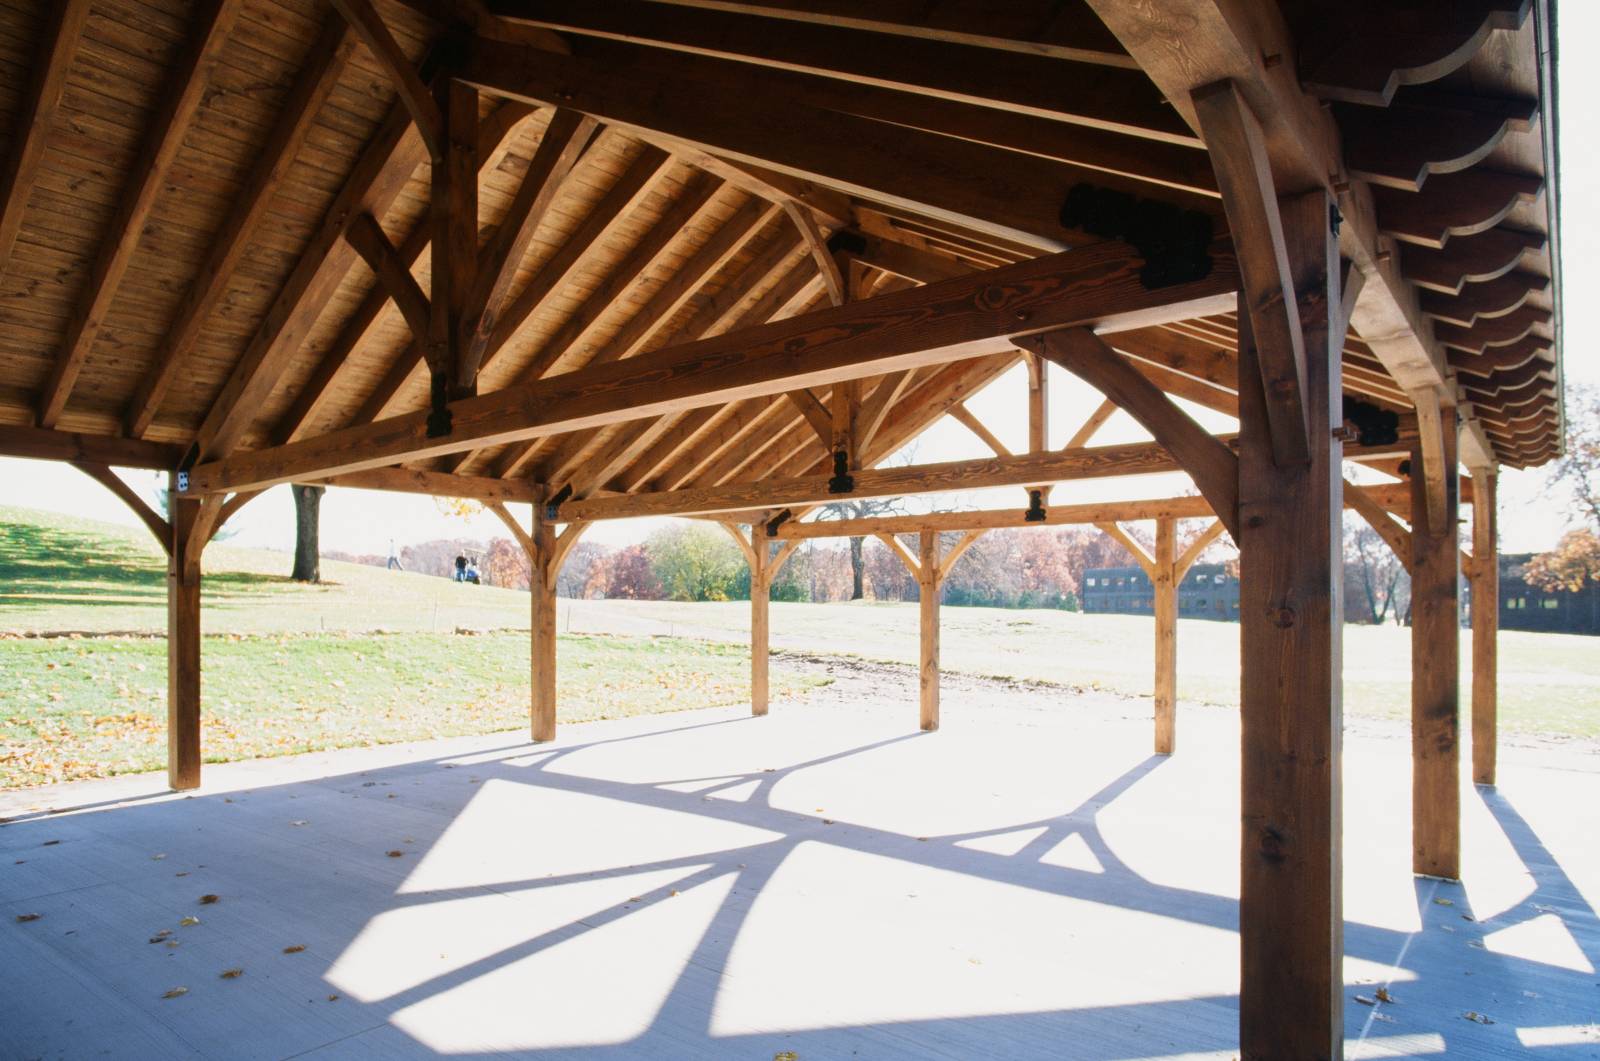 King Post Trusses & Decorative Rafter Tails • Bitterroot Timber Frame Pavilion